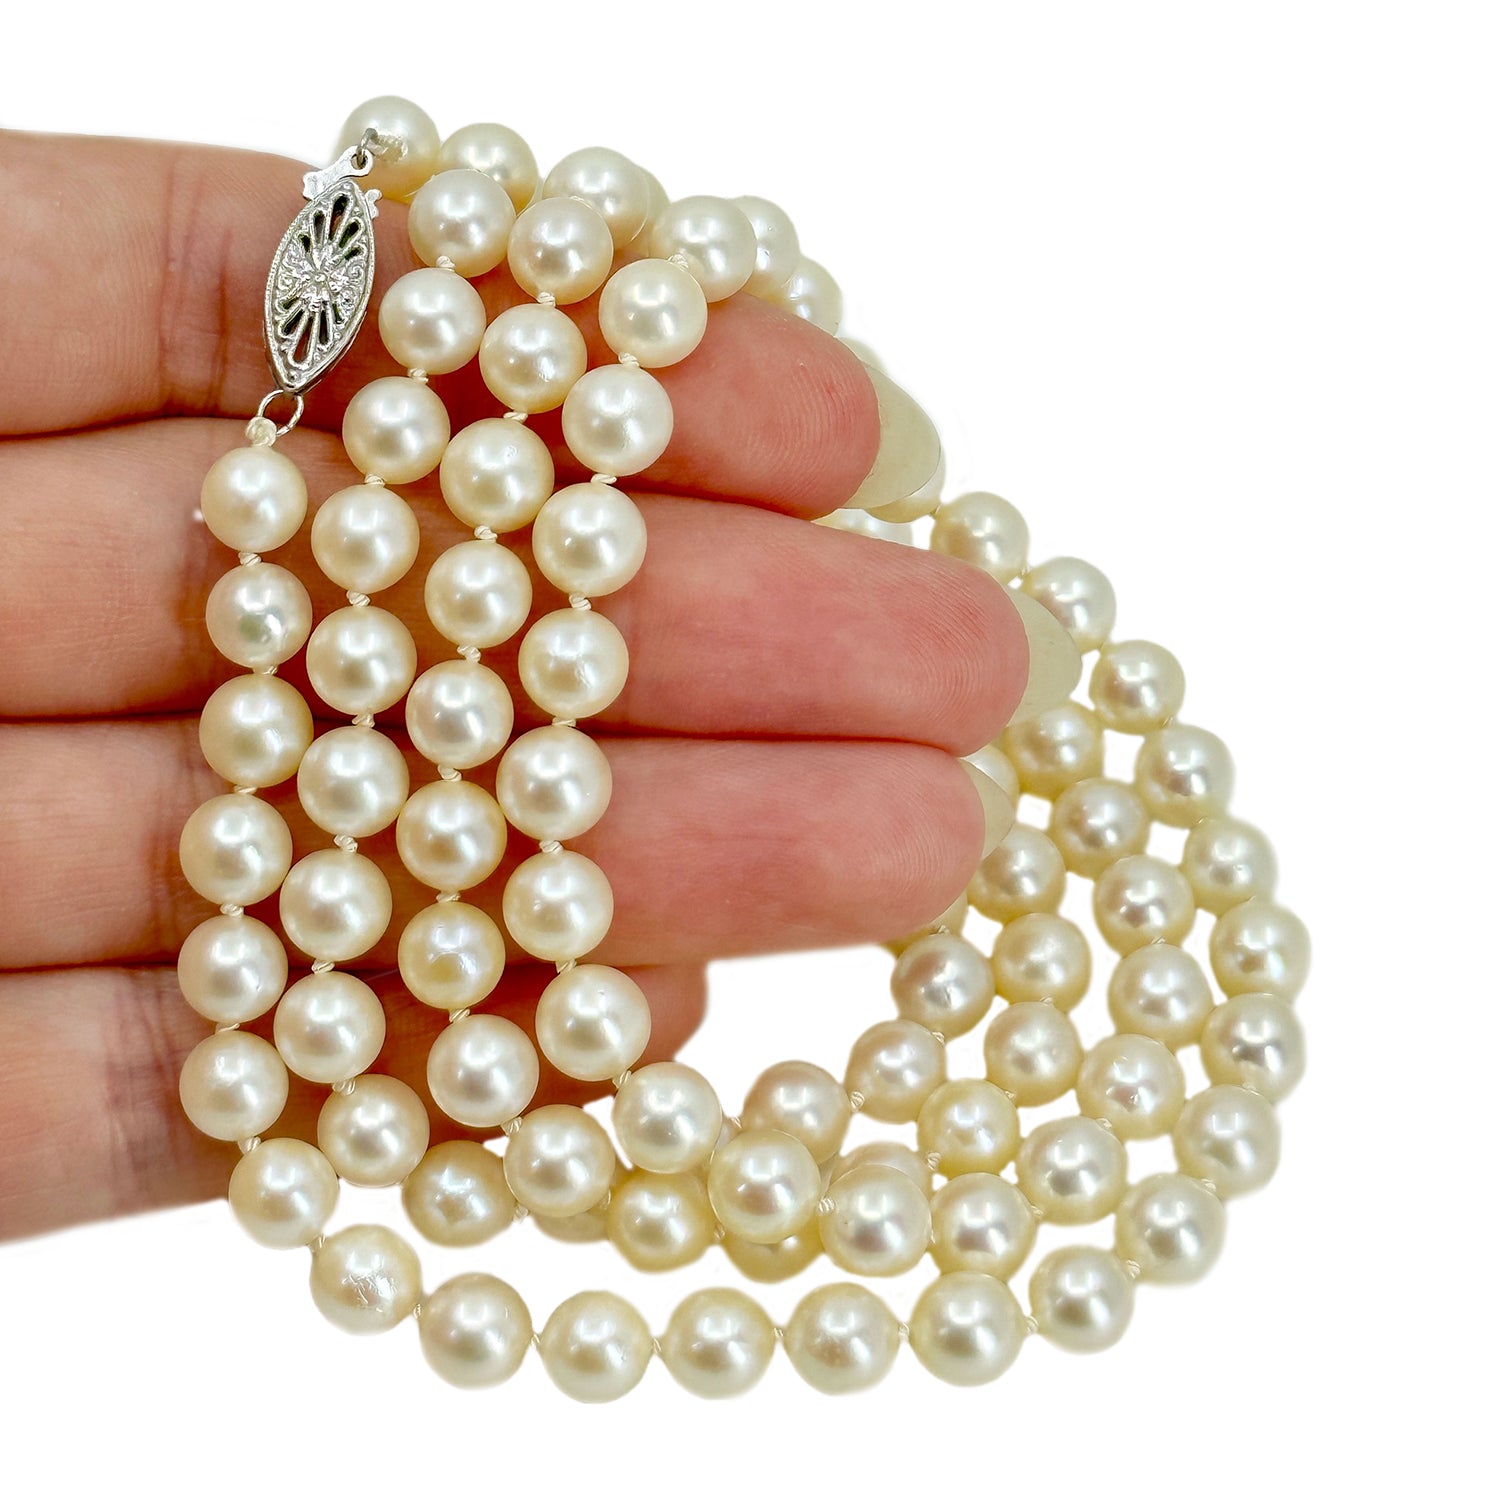 Filigree Opera Mid-Century Japanese Saltwater Cultured Akoya Pearl Vintage Necklace Strand - 14K White Gold 32.50 Inch